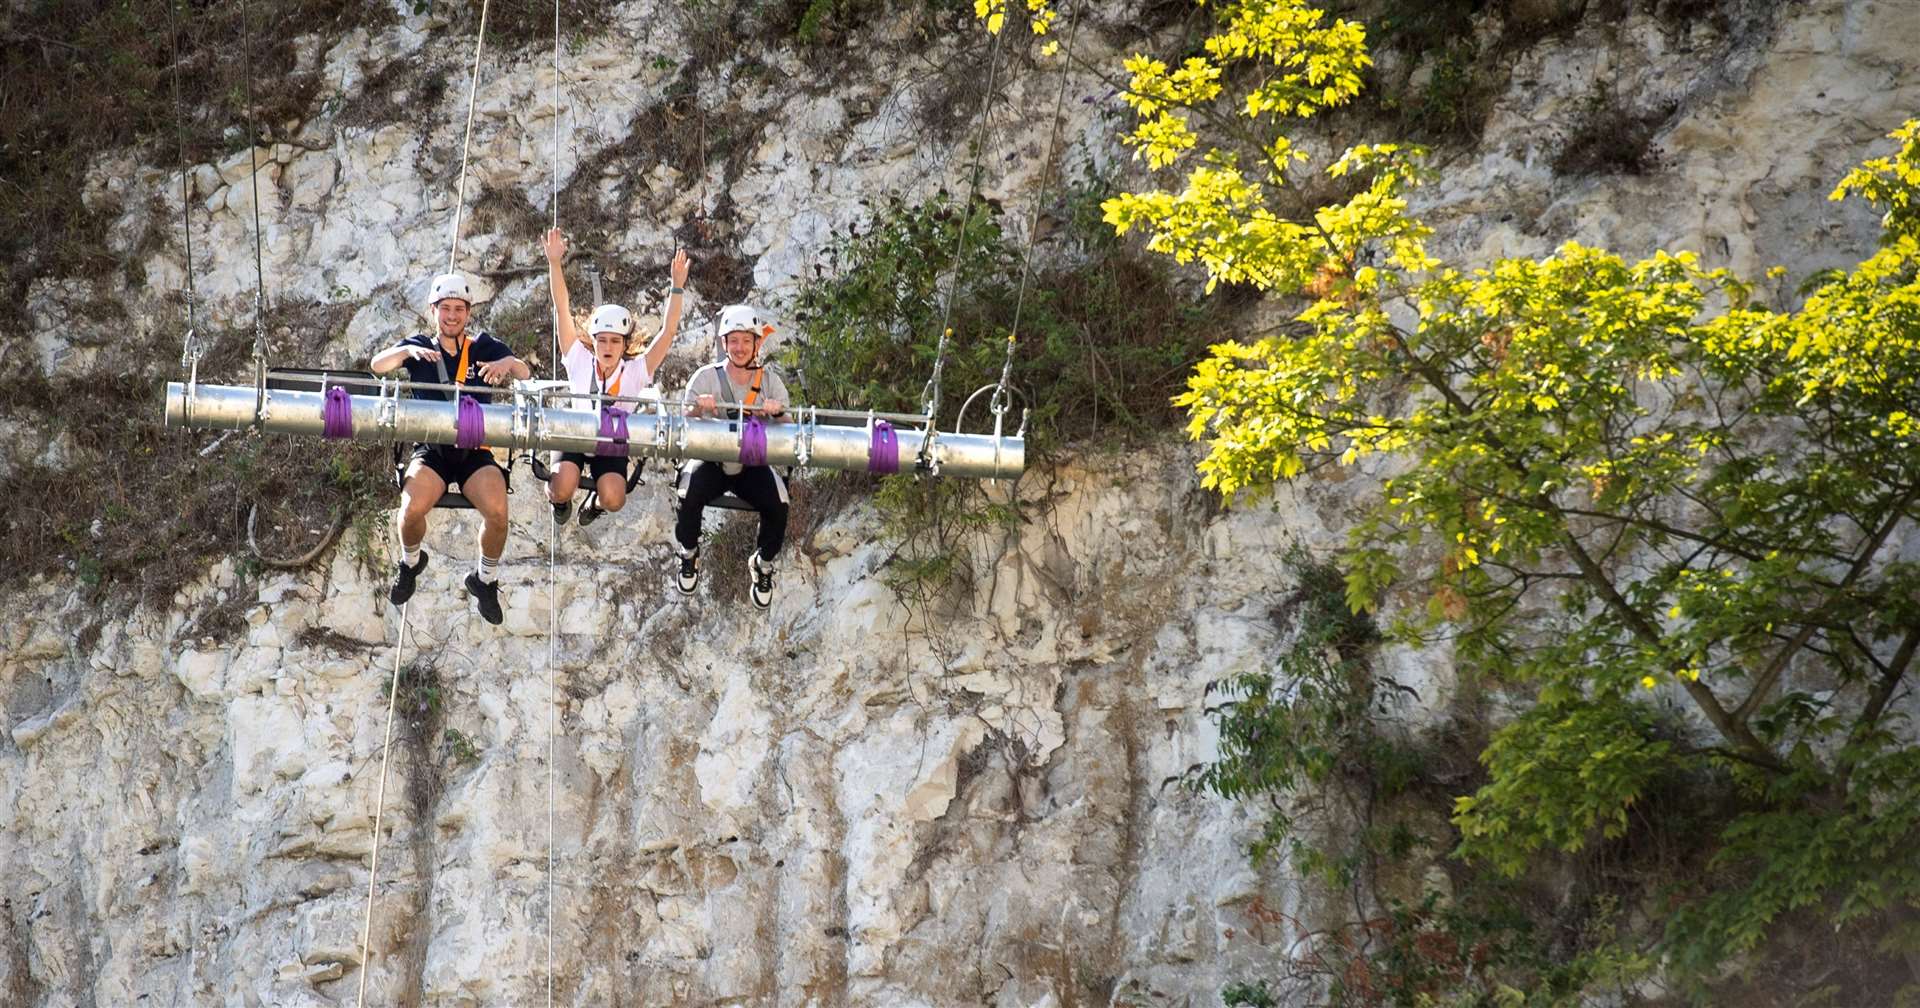 Fly over Bluewater’s lakes and quarry on the Hangloose zipline and giant swing. Picture: John Nguyen/PA Wire